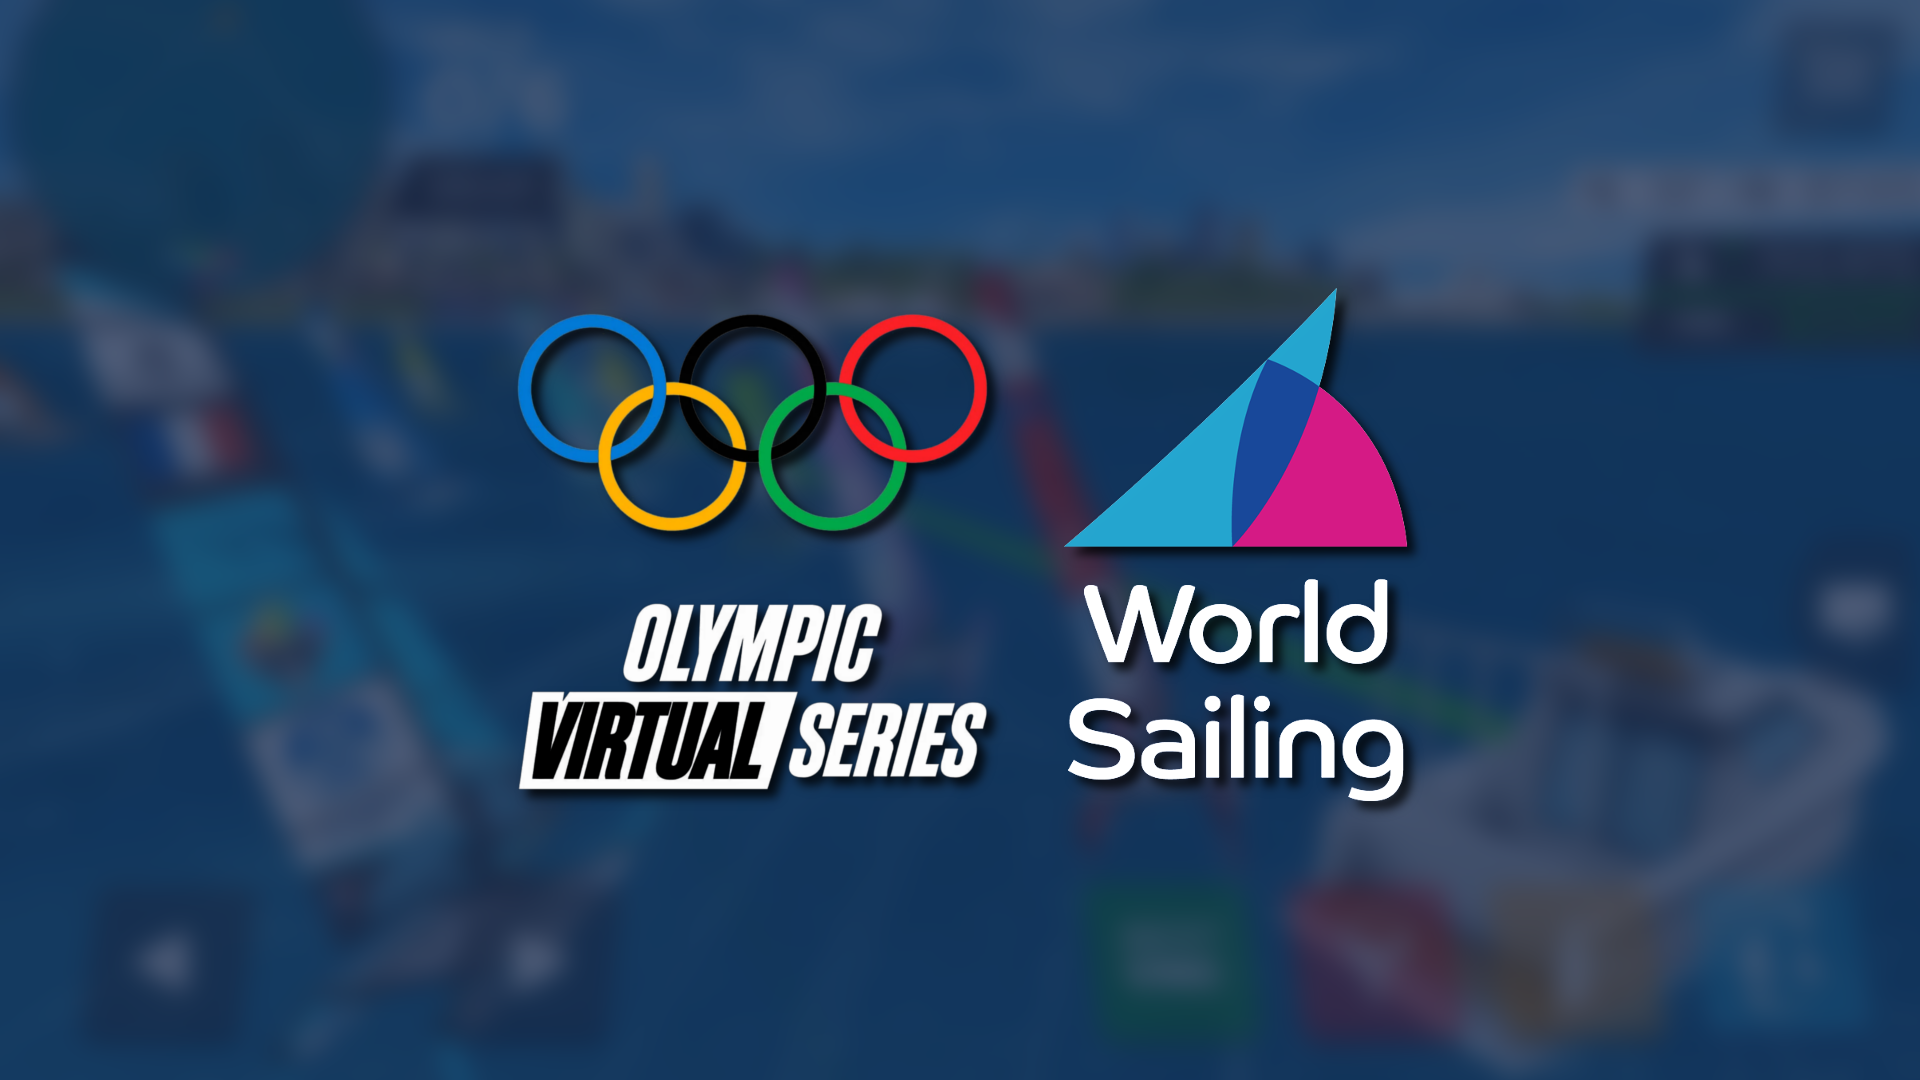 images/news/olympic-virtual-series.png